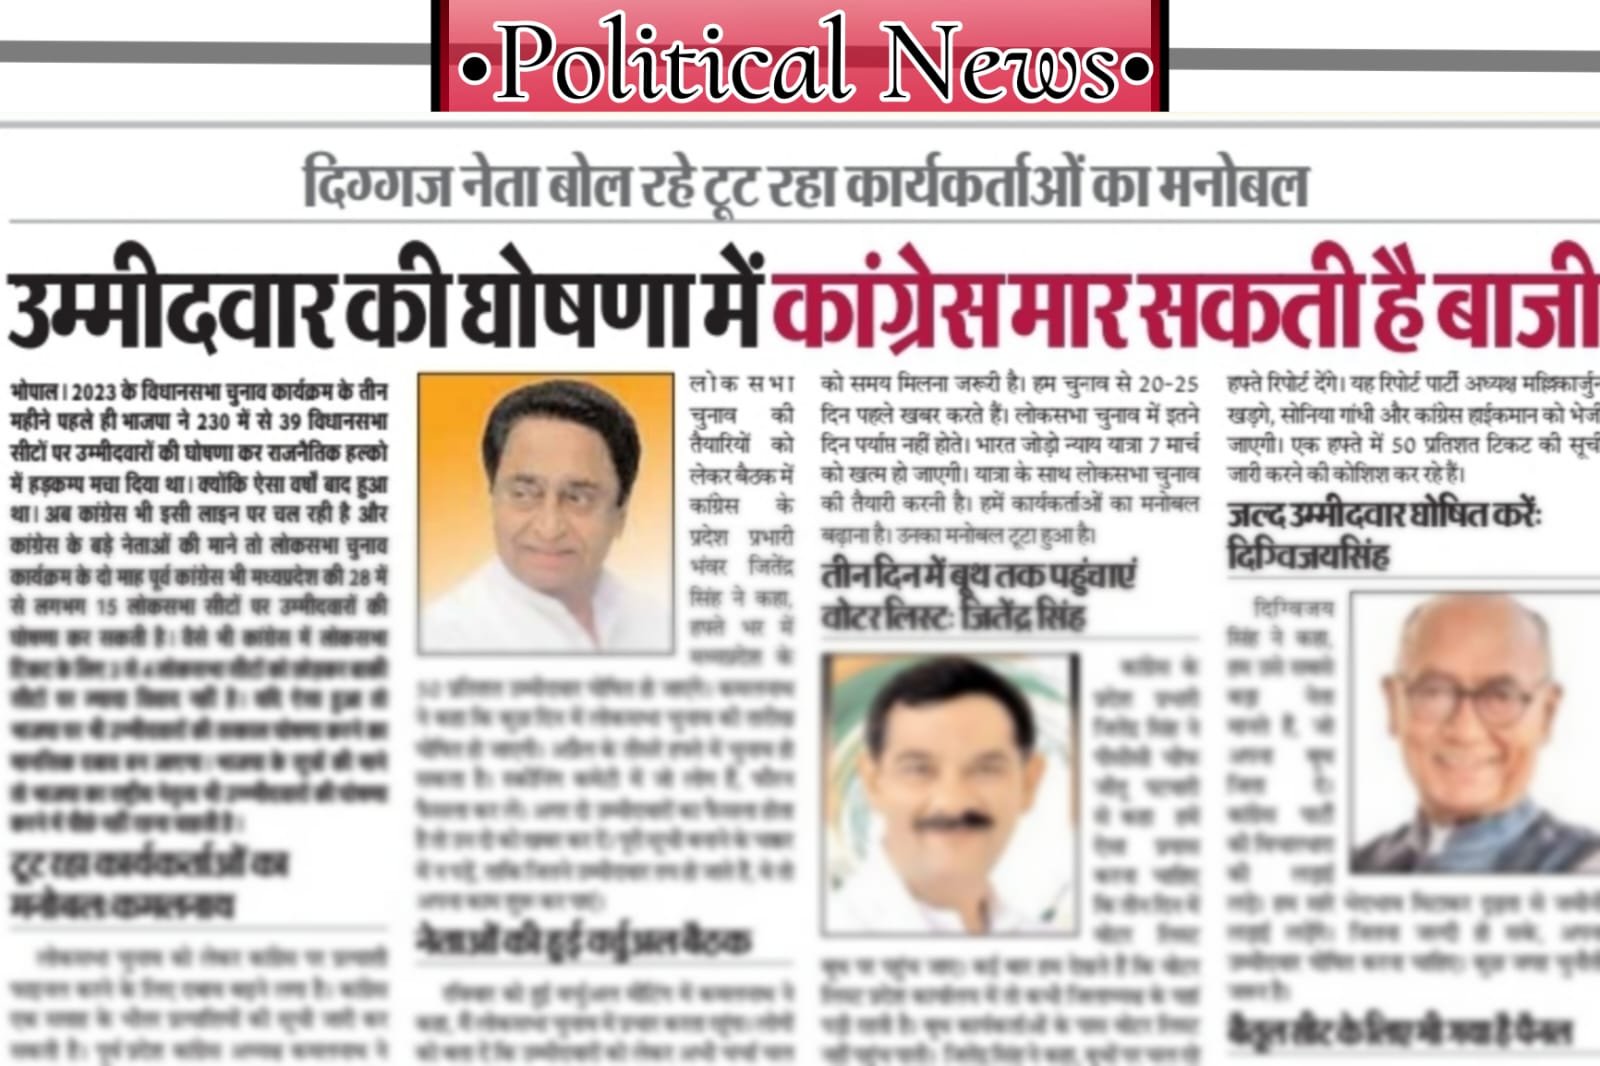 MP Political News - Congress may win in candidate announcement